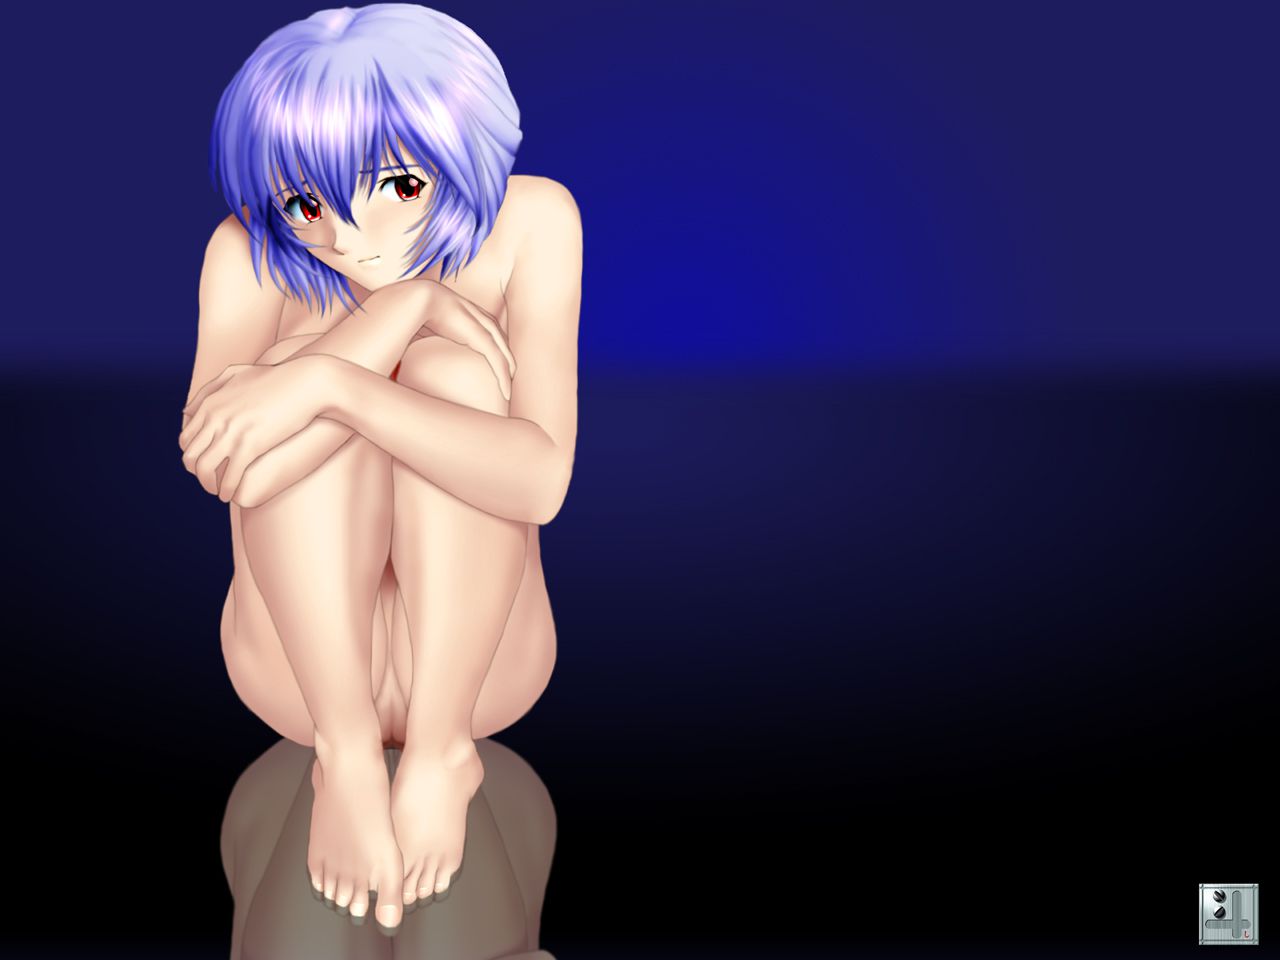 [yadorigi] The sight which was being made into the secret until now Rei ayanami 3